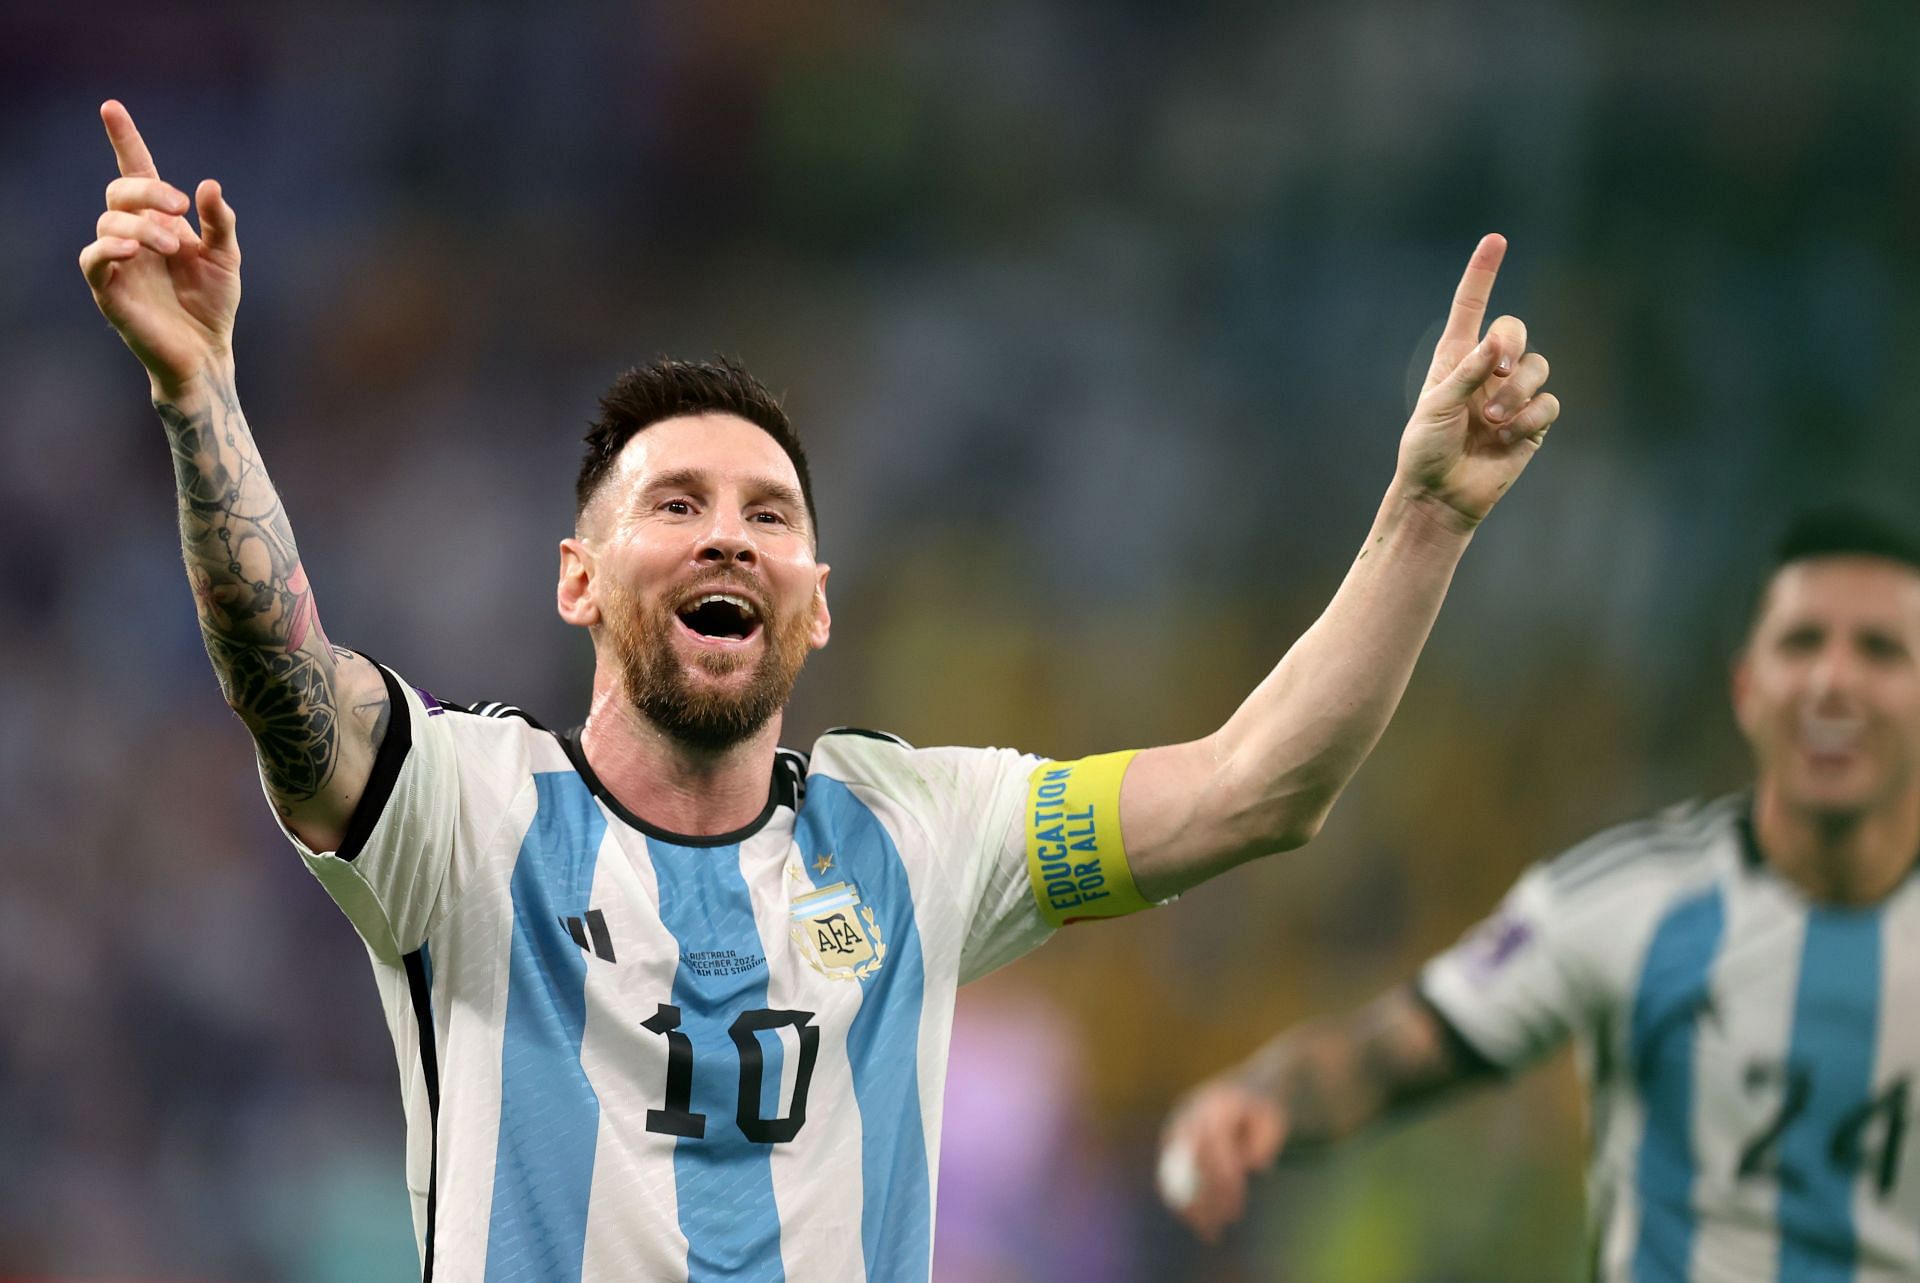 Lionel Messi was on song against Australia